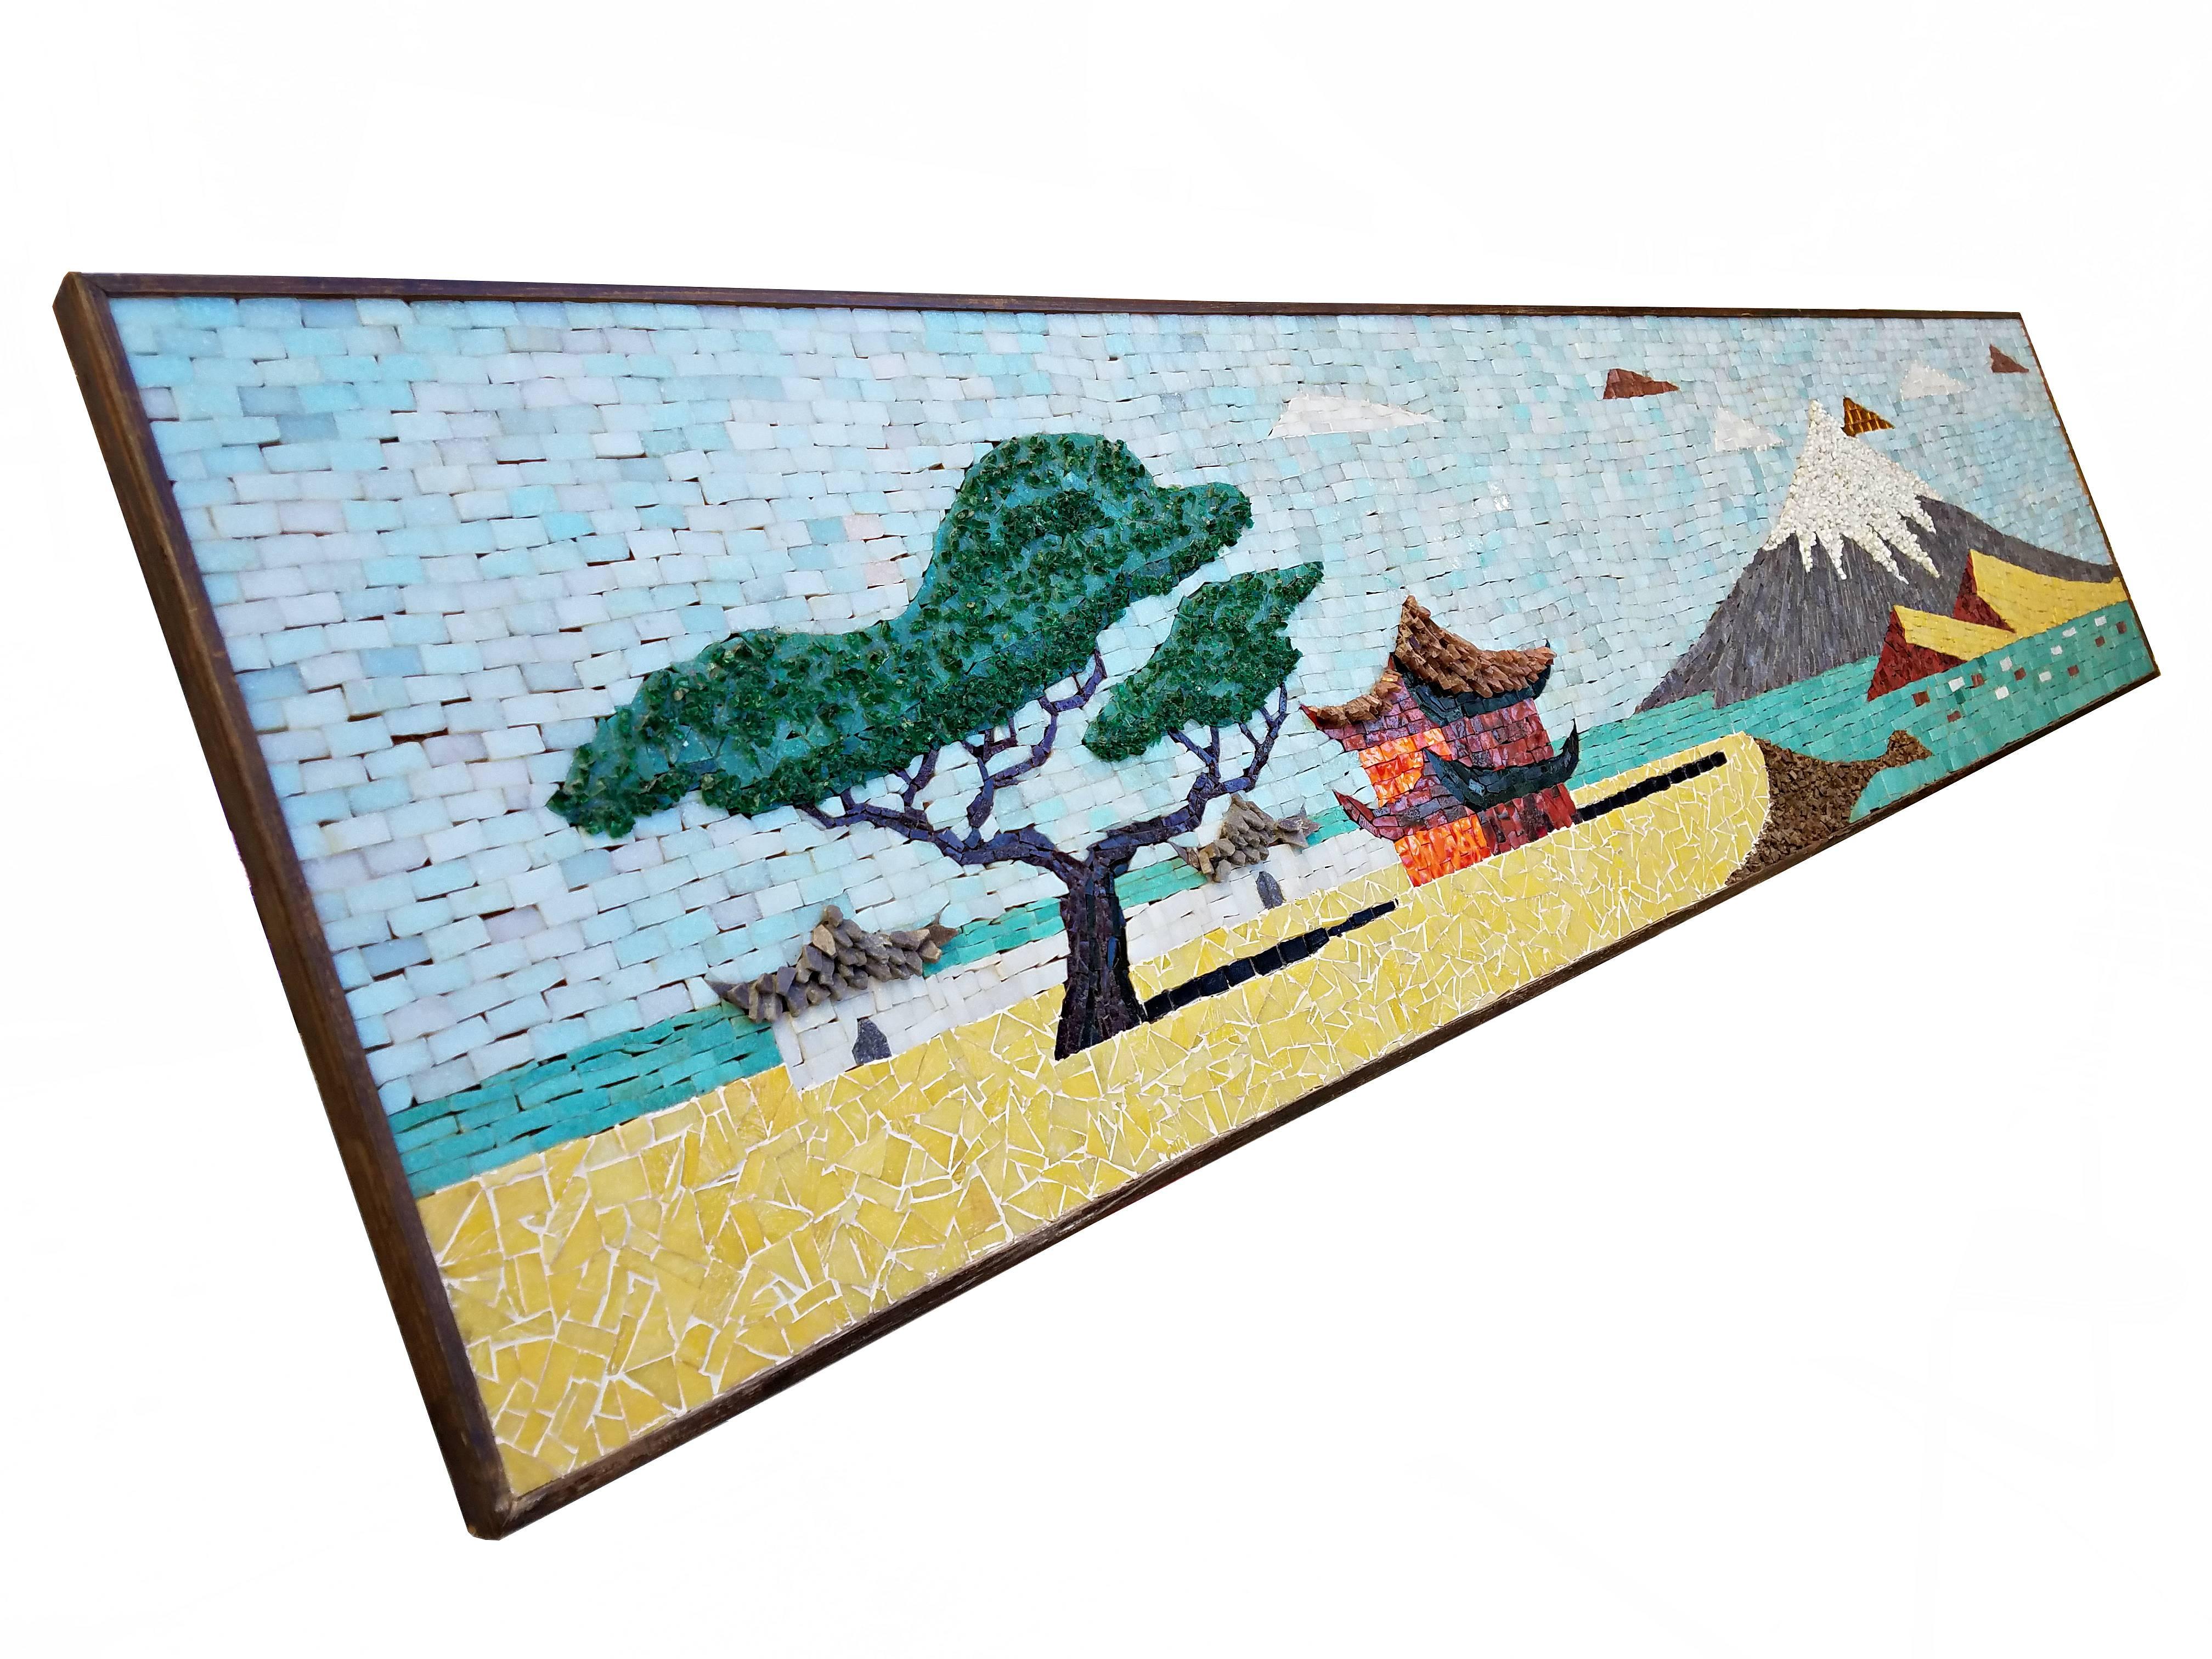 Gorgeous example of Mid-Century Mosaic. Art piece depicts Mt. Fuji volcano.

Similar in style to Evelyn Ackerman.